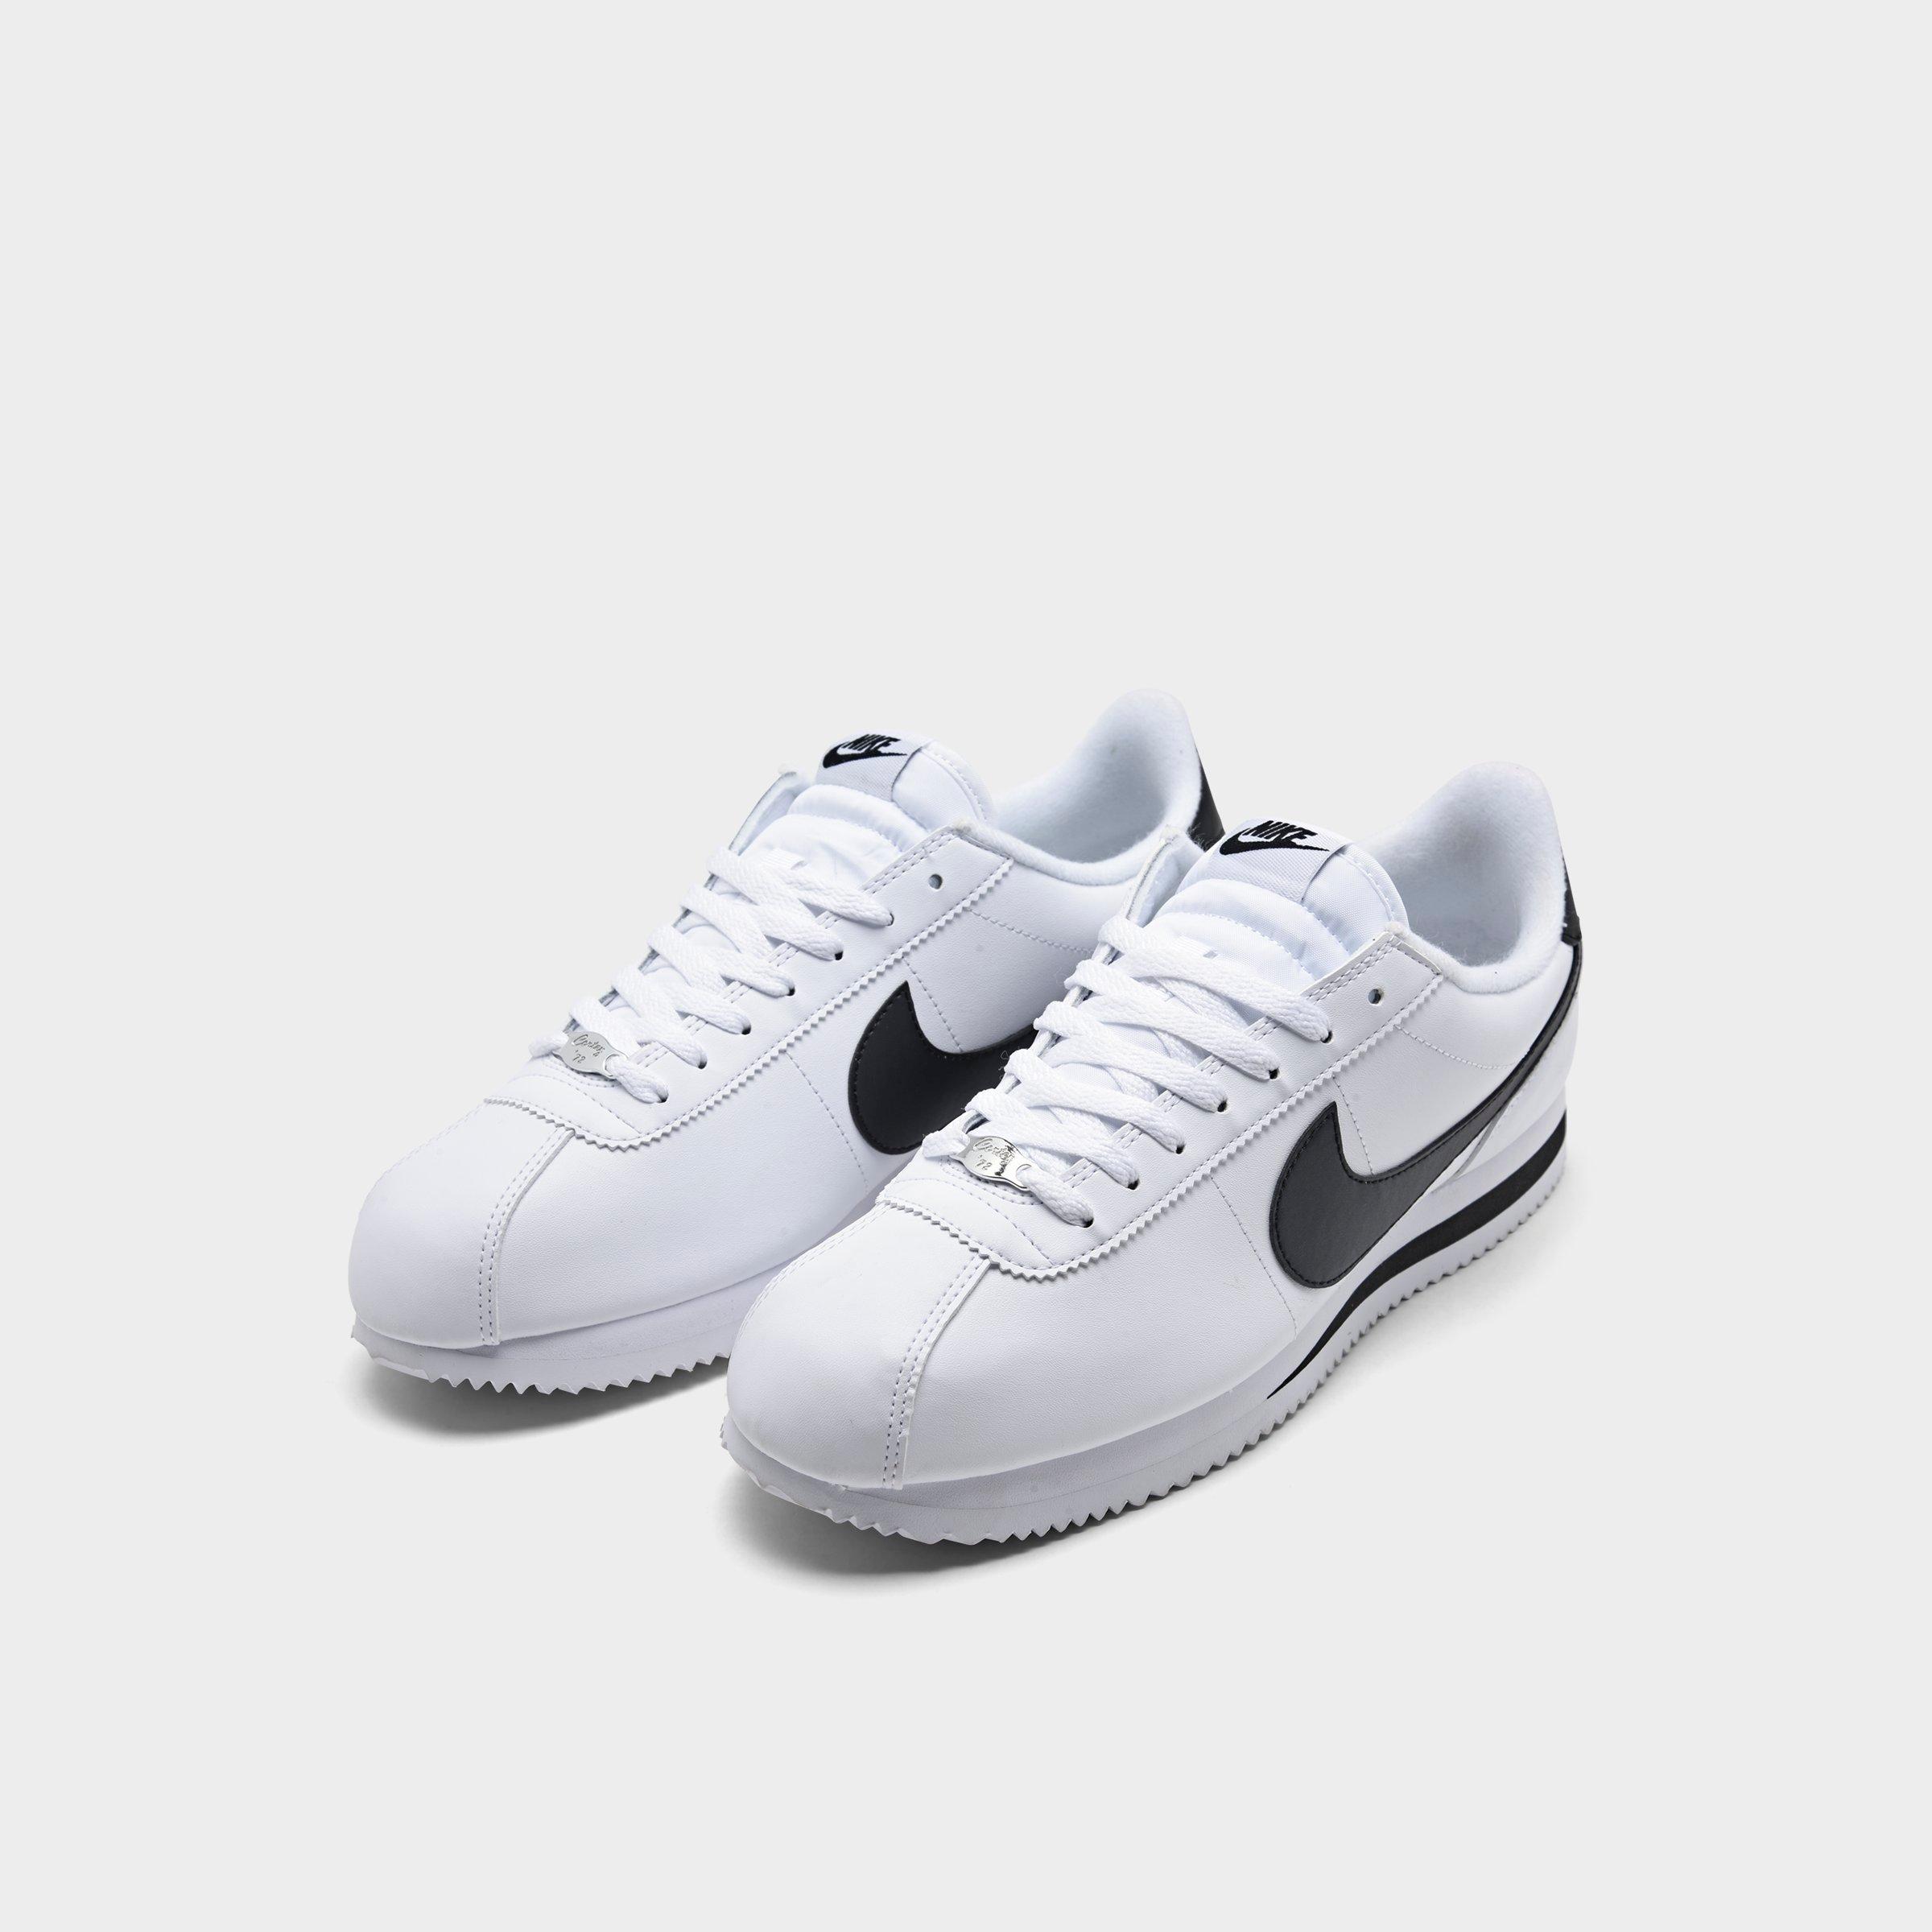 Mens Nike Cortez Black And White Online Sale, UP TO 20 OFF   www ...